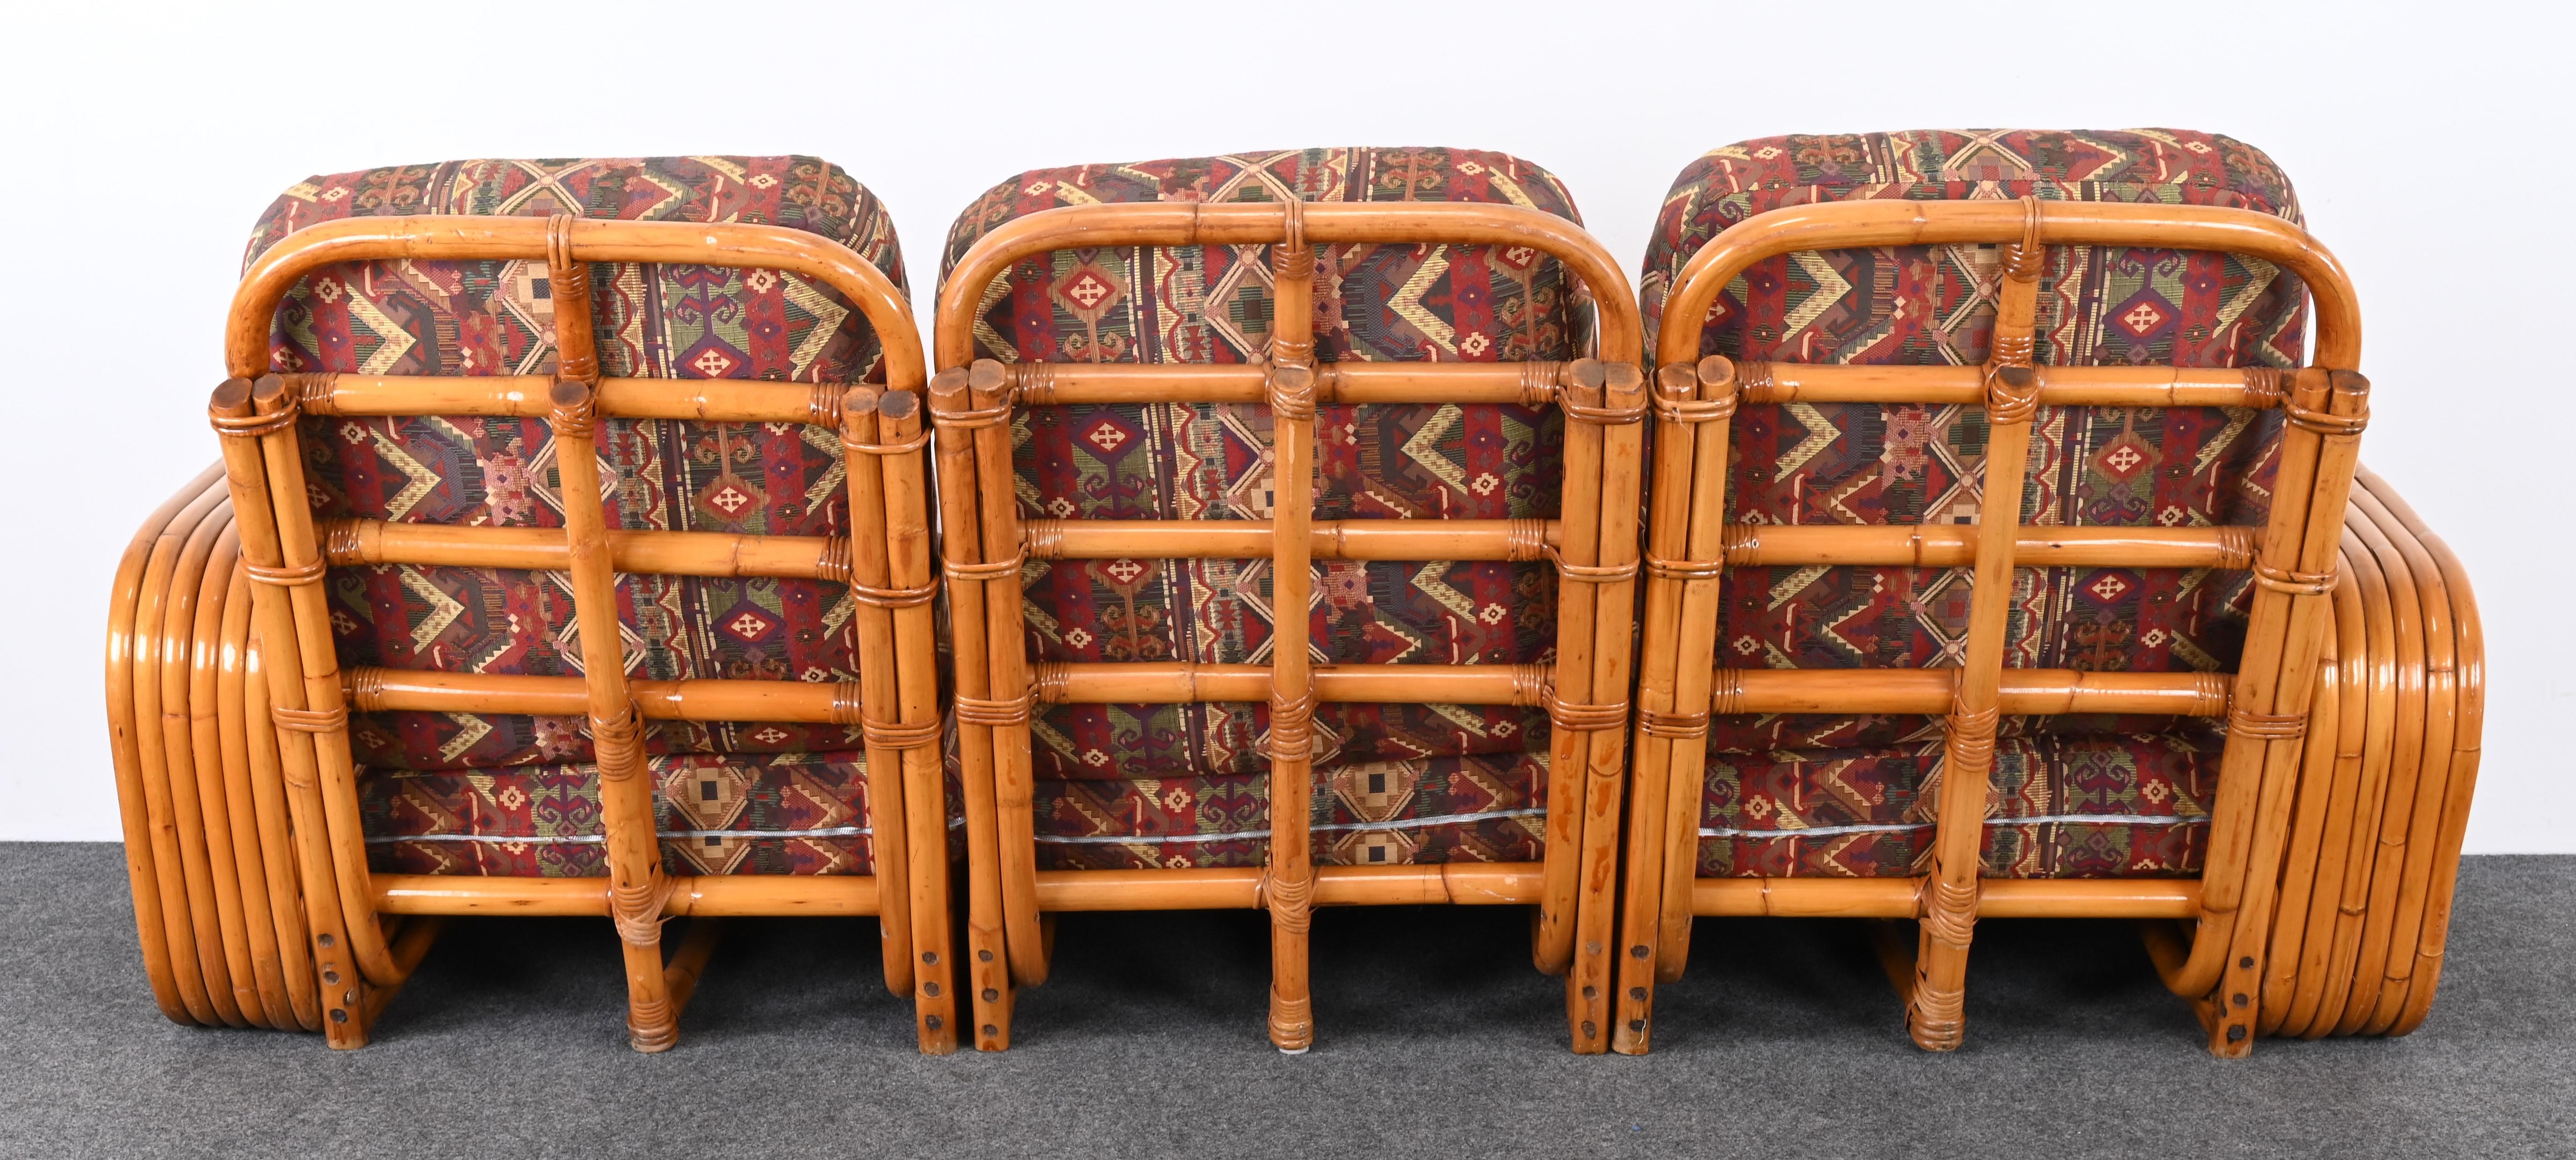 Set of Paul Frankl Style Rattan Furniture, 1940s For Sale 6